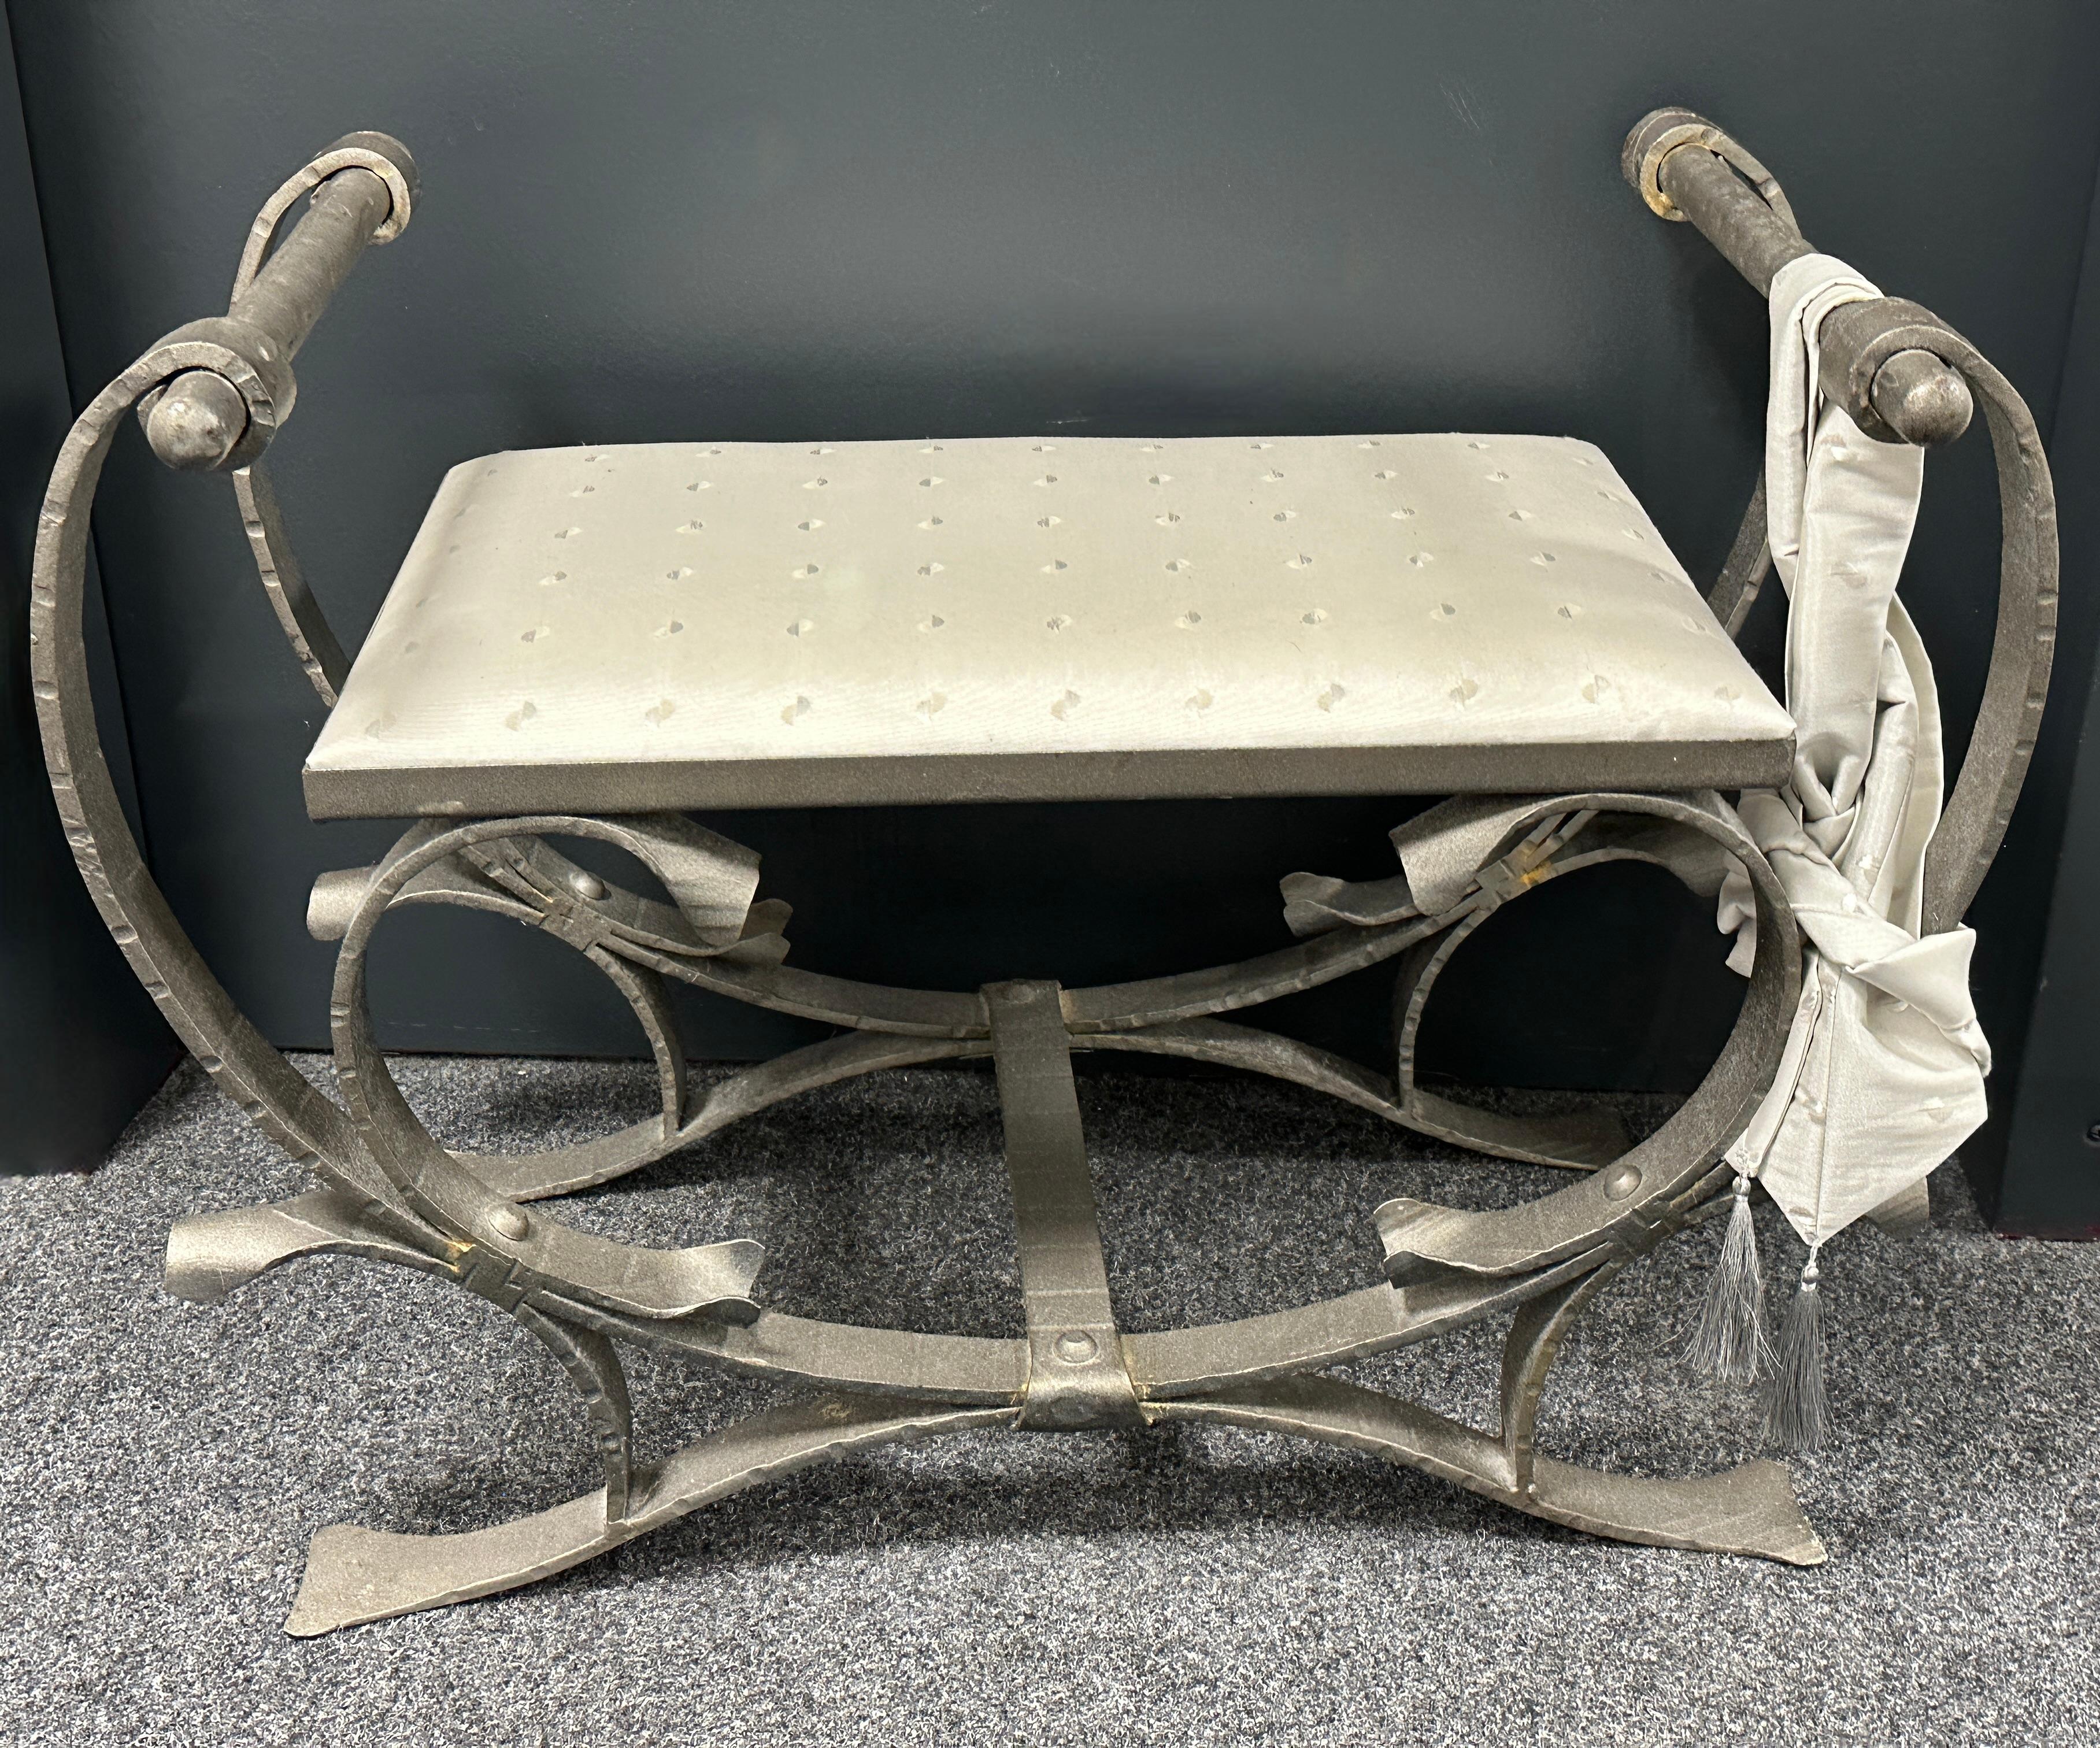 Silver Wrought Iron with Satin Cushion Seat, Stool or Bench Italy, 1960s For Sale 7